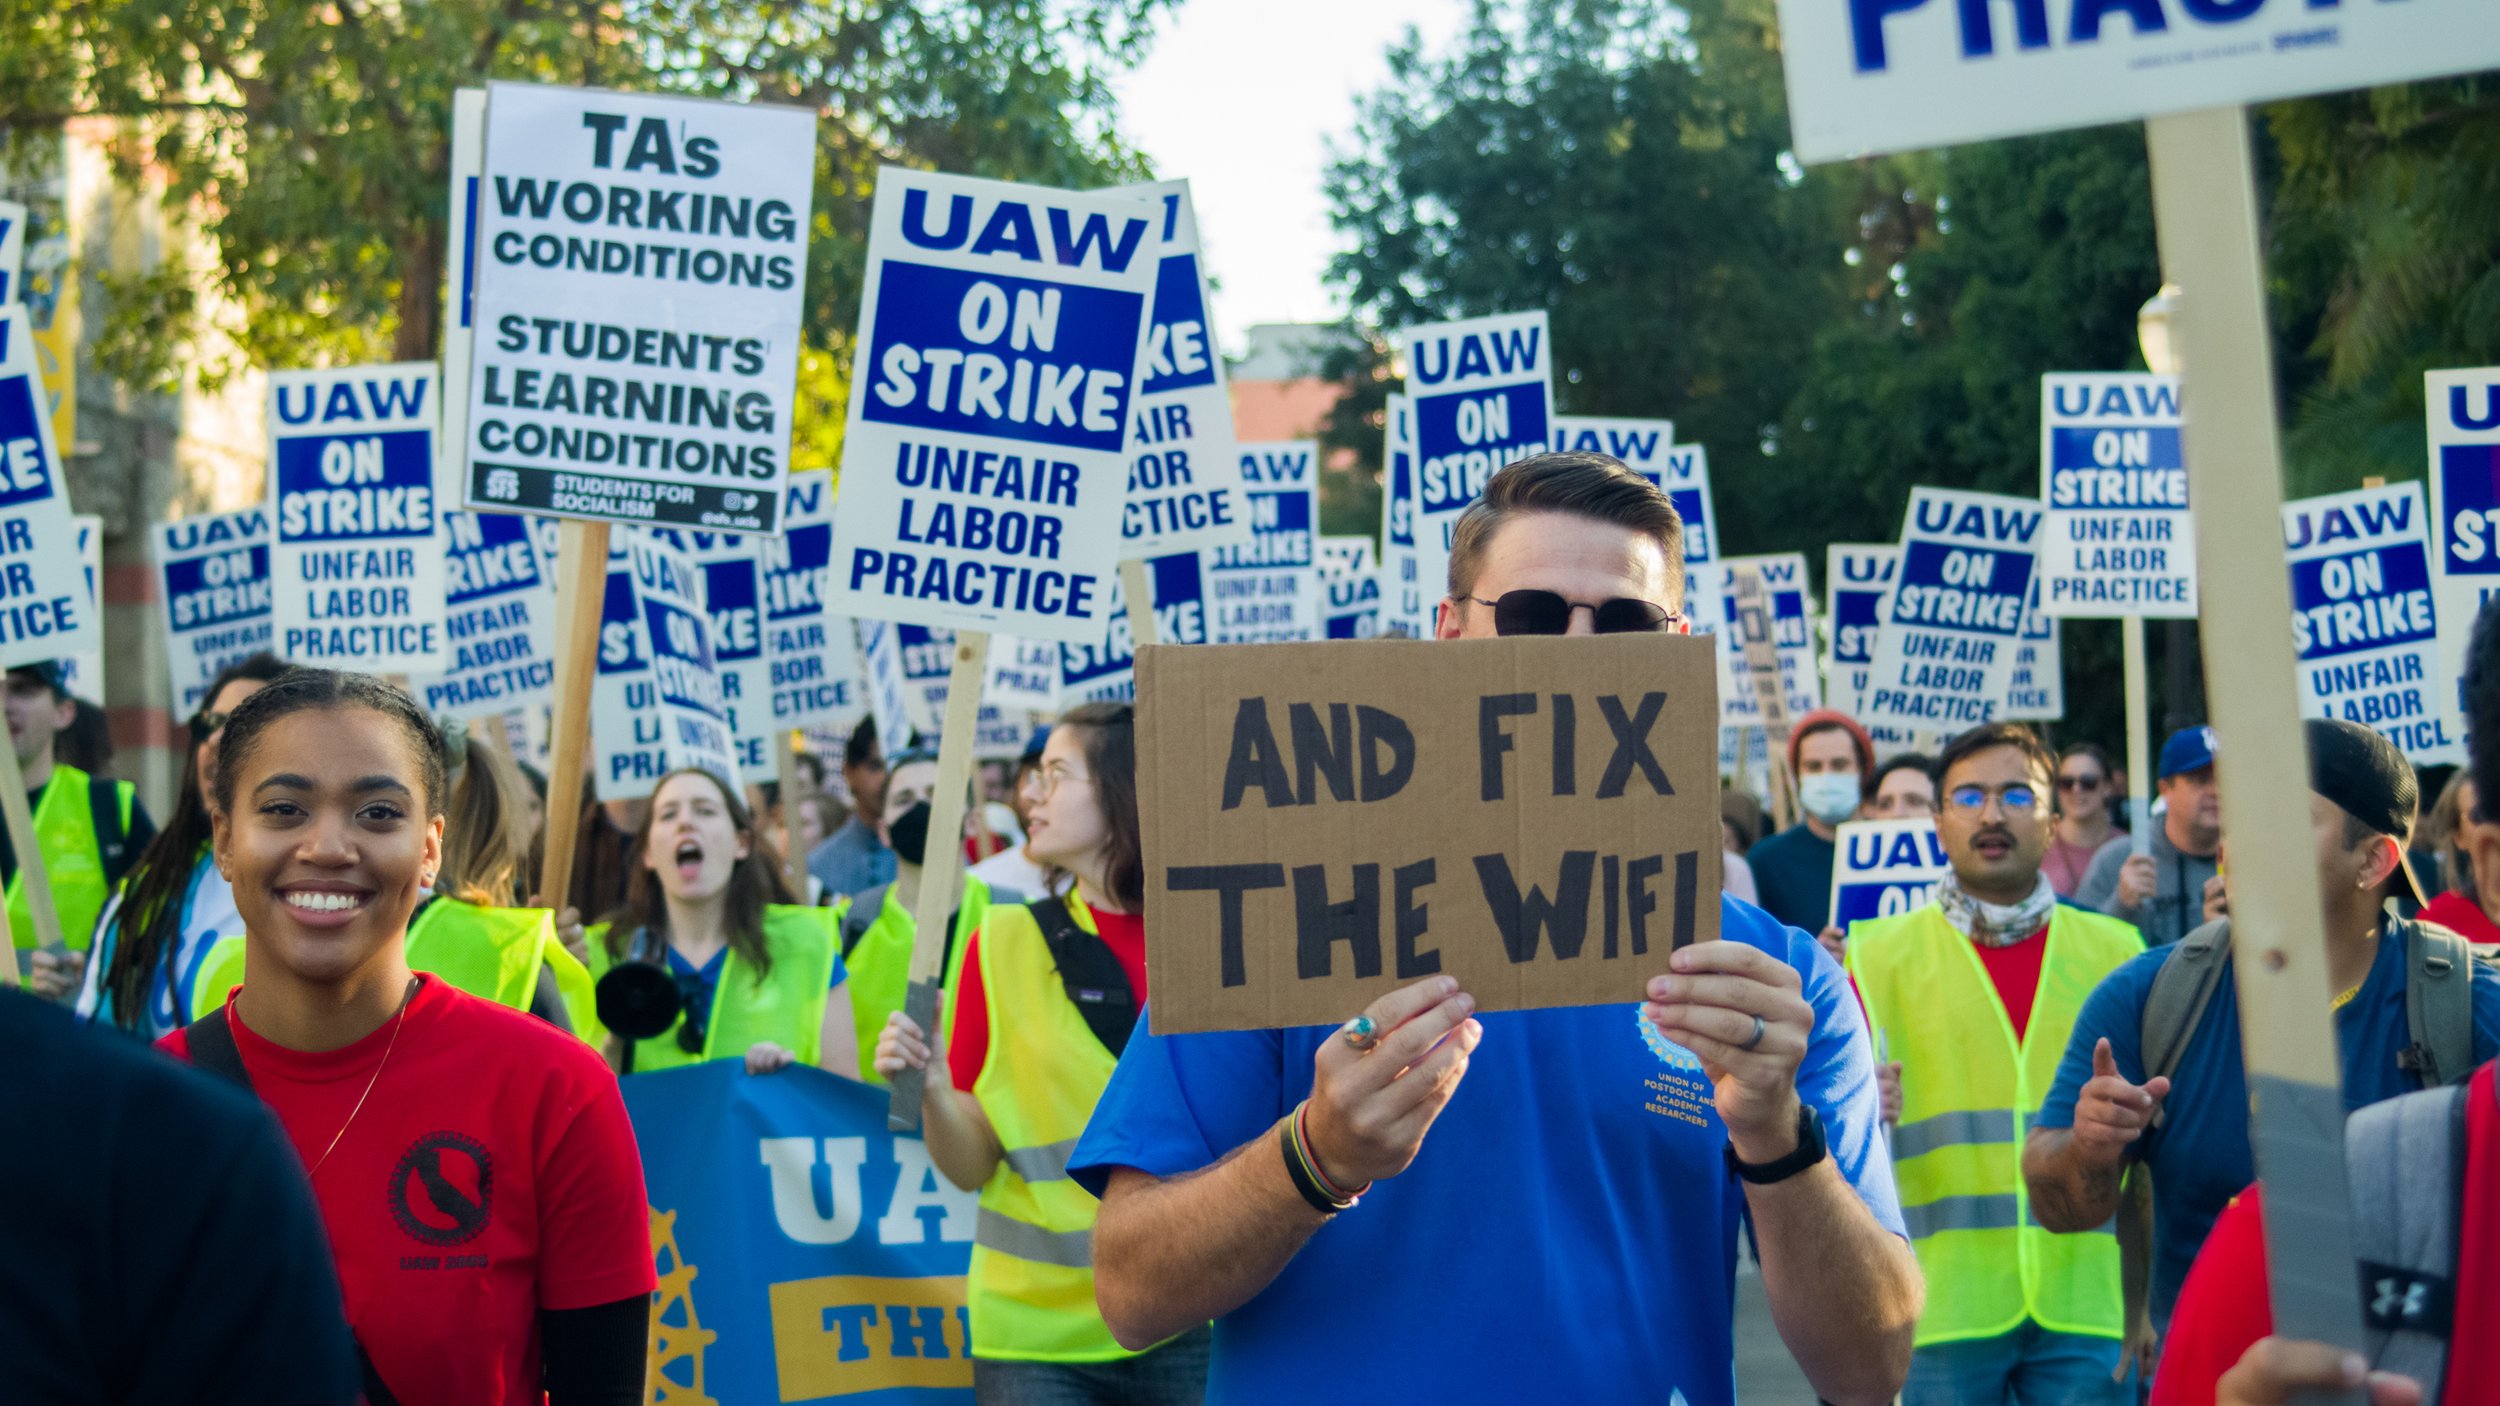   While most were protesting the unfair labor practices, some were concerned about other University issues on Monday, November 14 at University of California Los Angeles (UCLA). (Tyler Simms | The Corsair)  